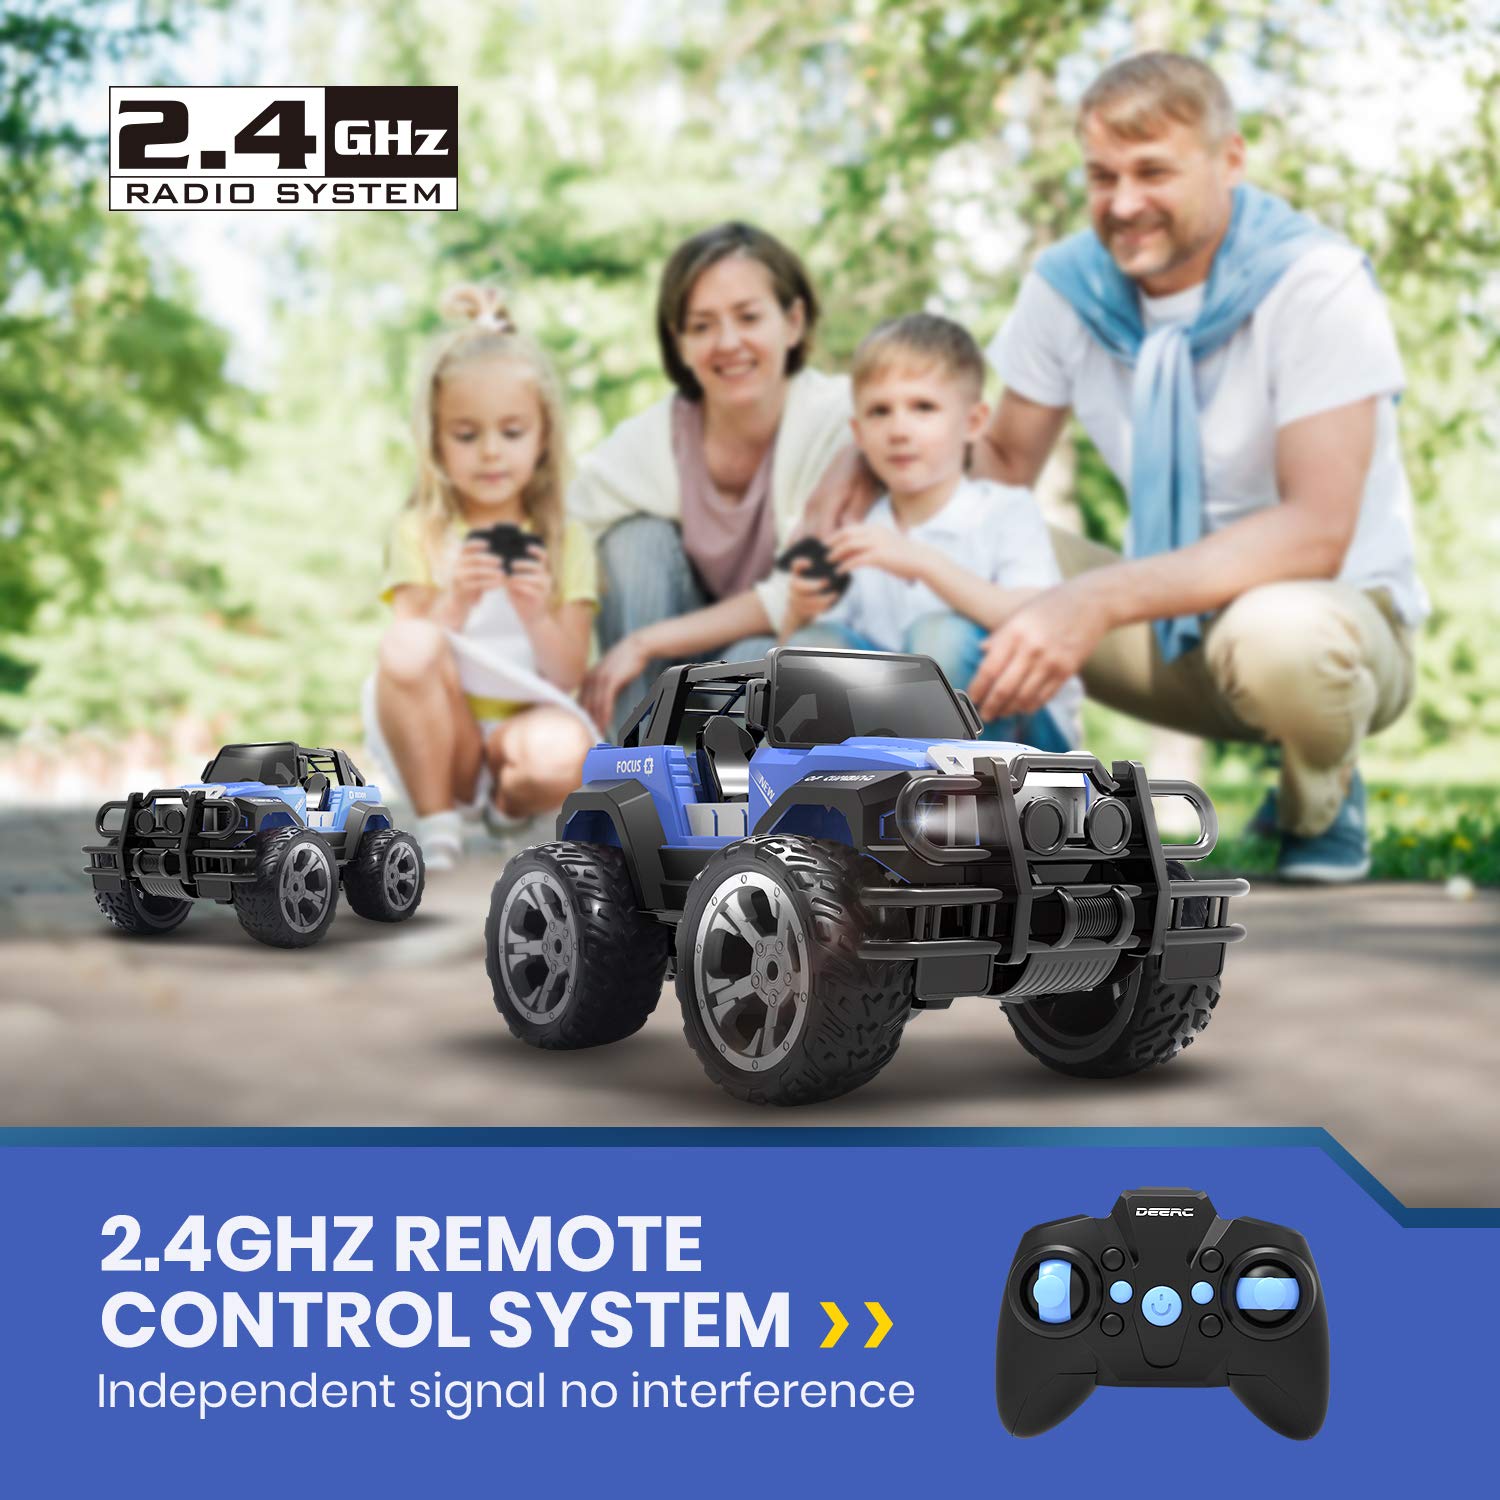 DEERC DE42 Remote Control Car RC Racing Cars,1:18 Scale 80 Min Play 2.4Ghz LED Light Auto Mode Off Road RC Trucks with Storage Case,All Terrain SUV Jeep Cars Toys Gifts for Boys Kids Girls Teens,Blue